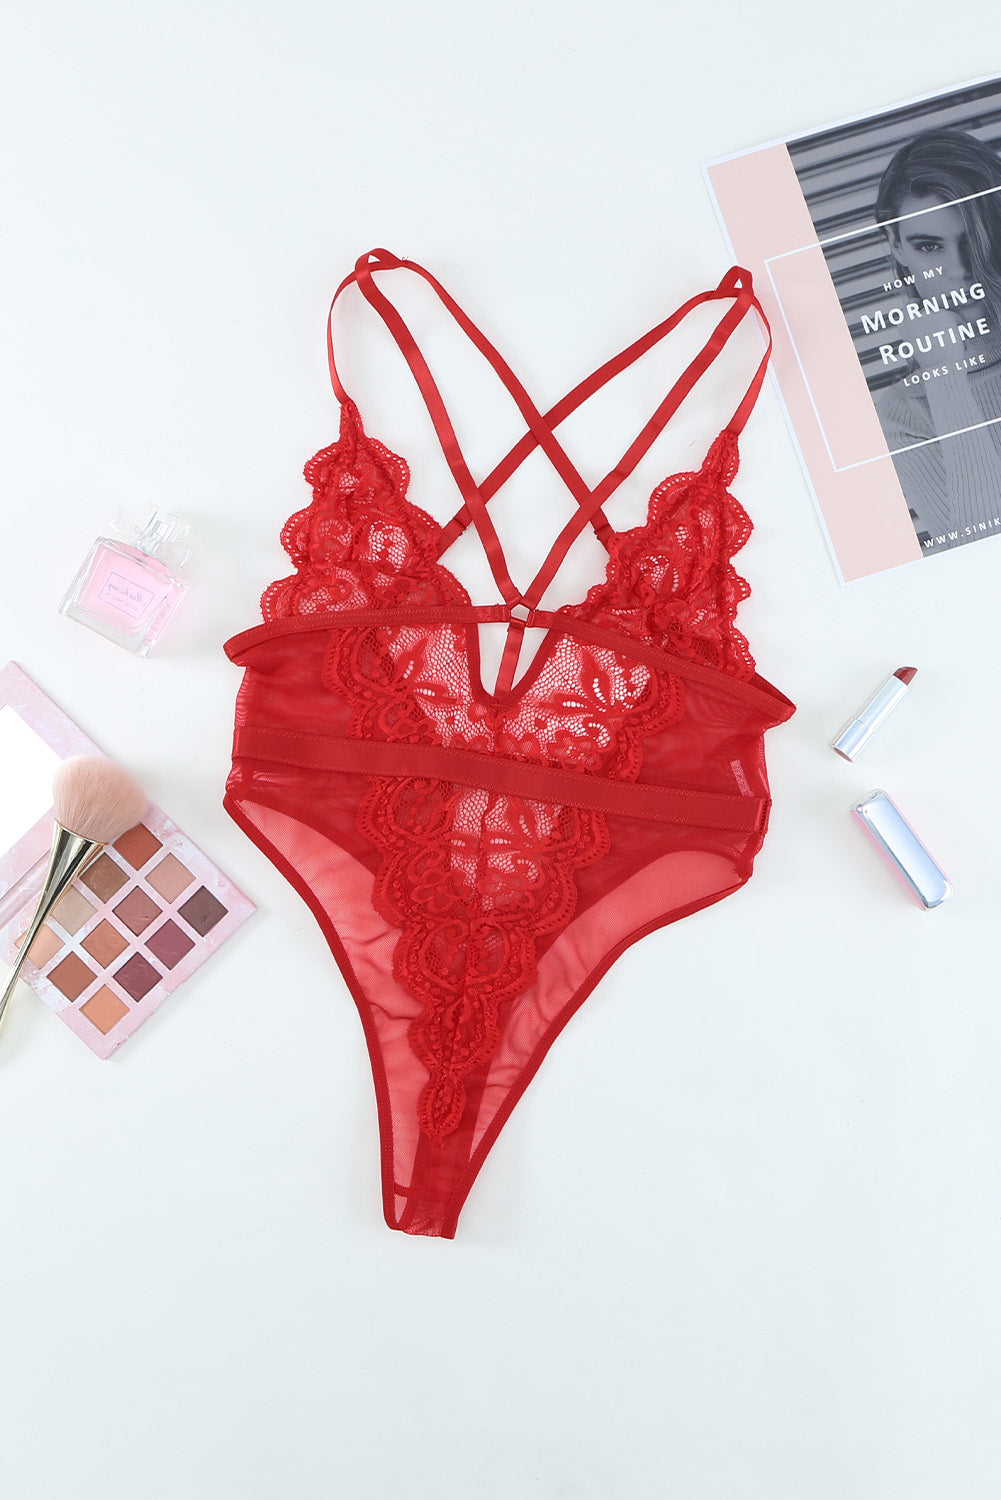 Red Lace Plunge High Leg Teddy Lingerie